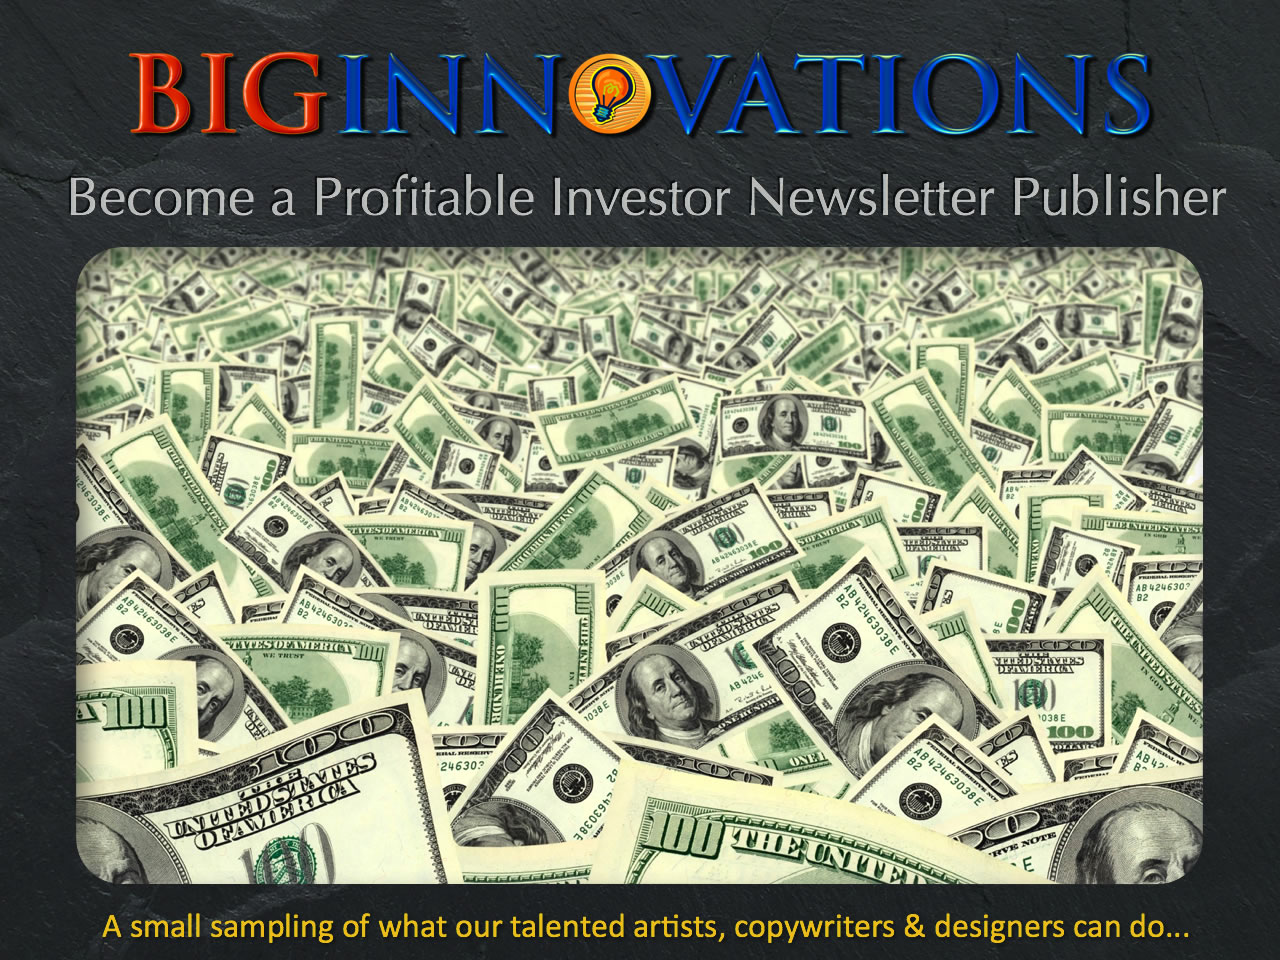 Become a profitable investor newsletter publiishing business